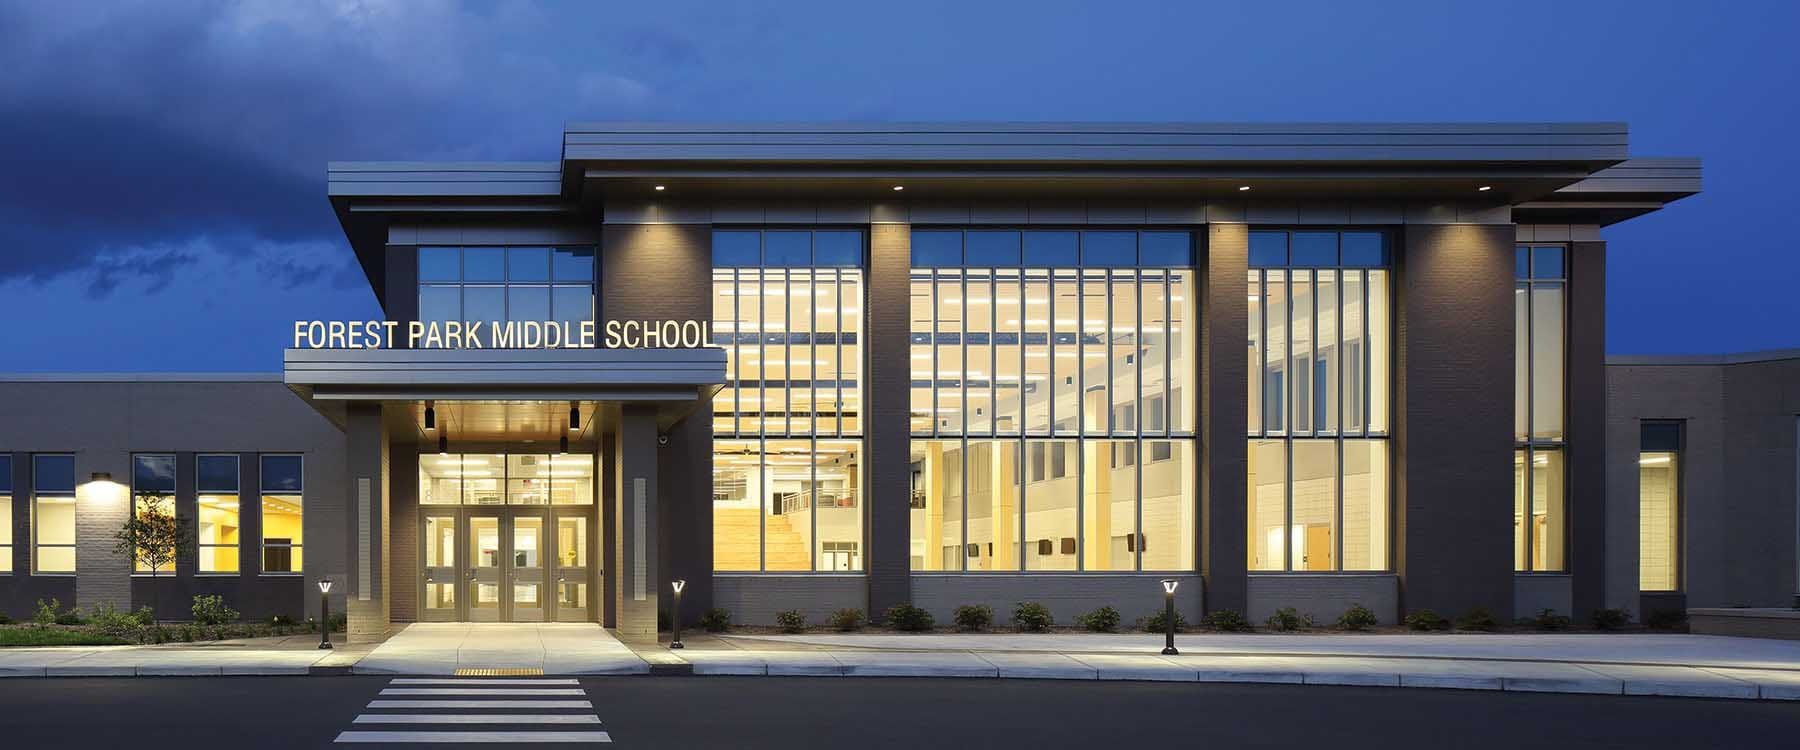 Forest Park Middle School Exterior And Entrance